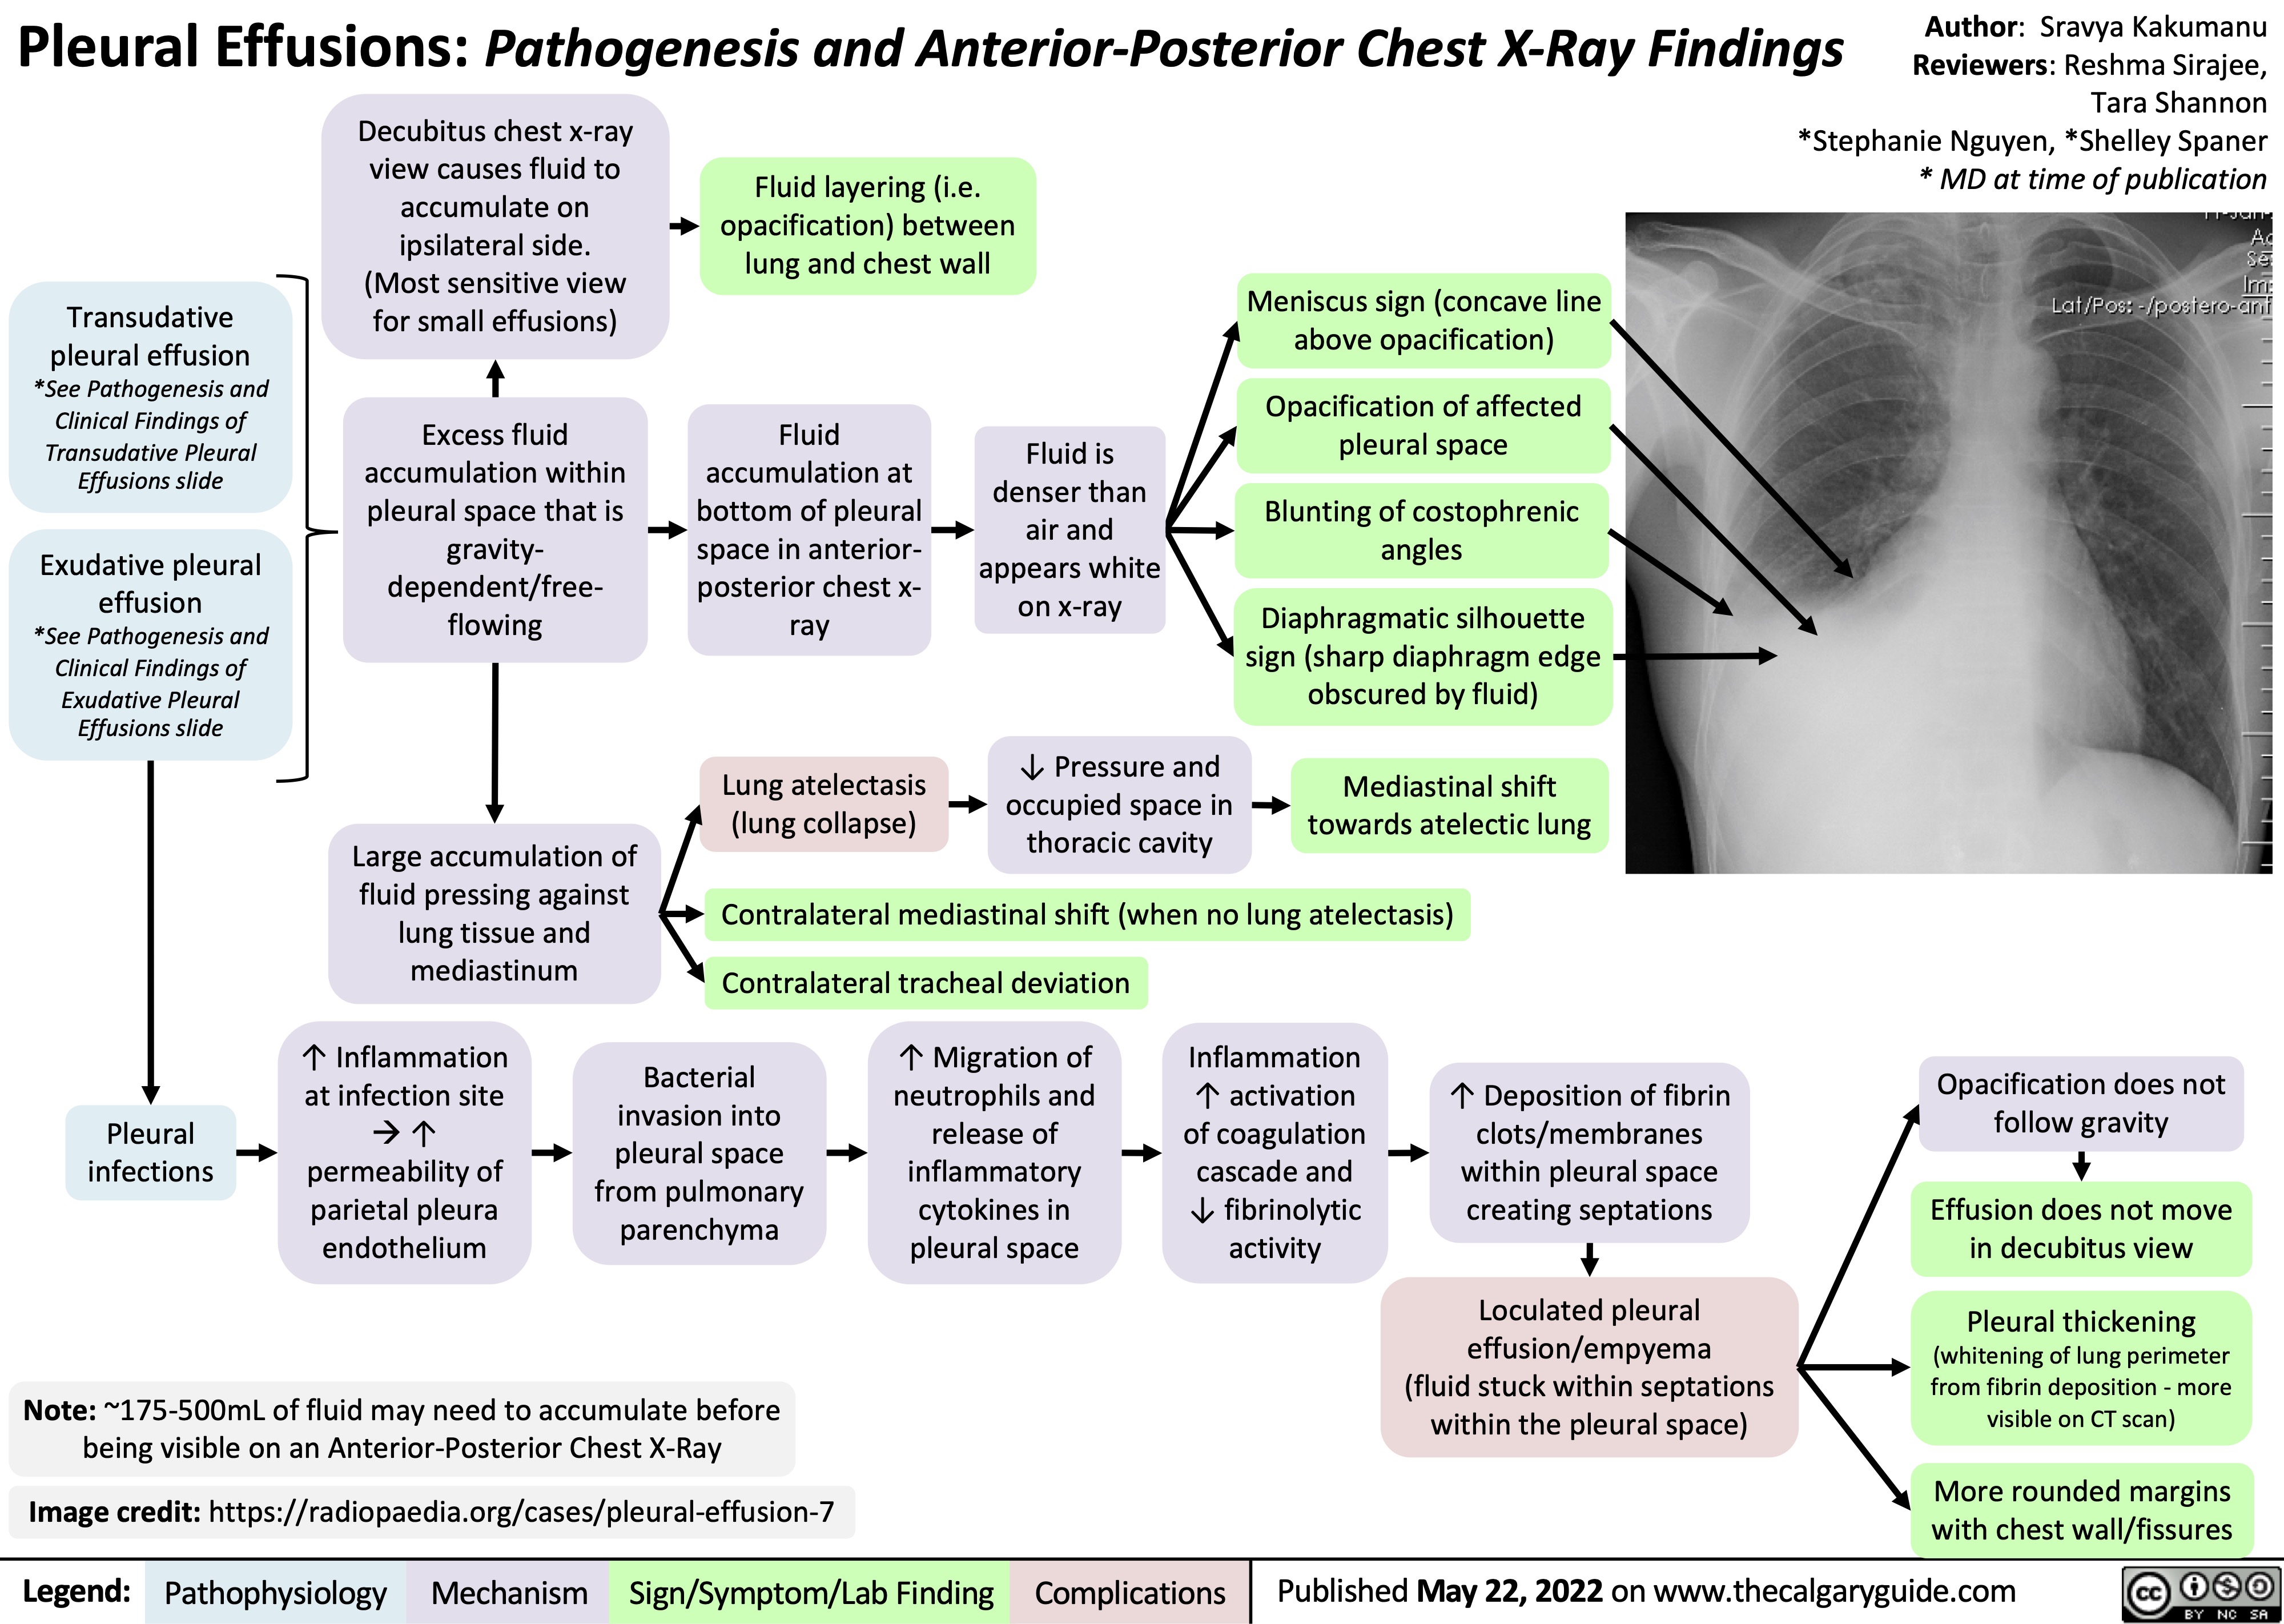 Pleural Effusions: Pathogenesis and Anterior-Posterior Chest X-Ray Findings
 Decubitus chest x-ray view causes fluid to accumulate on ipsilateral side. (Most sensitive view for small effusions)
Excess fluid accumulation within pleural space that is gravity- dependent/free- flowing
Large accumulation of fluid pressing against lung tissue and mediastinum
Fluid layering (i.e. opacification) between lung and chest wall
Author: Sravya Kakumanu Reviewers: Reshma Sirajee, Tara Shannon *Stephanie Nguyen, *Shelley Spaner * MD at time of publication
     Transudative
pleural effusion
*See Pathogenesis and Clinical Findings of
Transudative Pleural Effusions slide
Exudative pleural
effusion
*See Pathogenesis and Clinical Findings of
Exudative Pleural Effusions slide
Fluid accumulation at bottom of pleural space in anterior- posterior chest x- ray
Lung atelectasis (lung collapse)
Fluid is denser than air and appears white on x-ray
↓ Pressure and occupied space in thoracic cavity
Meniscus sign (concave line above opacification)
Opacification of affected pleural space
Blunting of costophrenic angles
Diaphragmatic silhouette sign (sharp diaphragm edge obscured by fluid)
Mediastinal shift towards atelectic lung
                      Contralateral mediastinal shift (when no lung atelectasis)
 Contralateral tracheal deviation
        Pleural infections
↑ Inflammation at infection site à↑ permeability of parietal pleura endothelium
Bacterial invasion into pleural space from pulmonary parenchyma
↑ Migration of neutrophils and release of inflammatory cytokines in pleural space
Inflammation ↑ activation of coagulation cascade and ↓ fibrinolytic activity
↑ Deposition of fibrin clots/membranes within pleural space creating septations
Loculated pleural effusion/empyema (fluid stuck within septations within the pleural space)
Opacification does not follow gravity
Effusion does not move in decubitus view
Pleural thickening (whitening of lung perimeter from fibrin deposition - more visible on CT scan)
More rounded margins with chest wall/fissures
    Note: ~175-500mL of fluid may need to accumulate before being visible on an Anterior-Posterior Chest X-Ray
Image credit: https://radiopaedia.org/cases/pleural-effusion-7
   Legend:
 Pathophysiology
 Mechanism
Sign/Symptom/Lab Finding
 Complications
 Published May 22, 2022 on www.thecalgaryguide.com
  